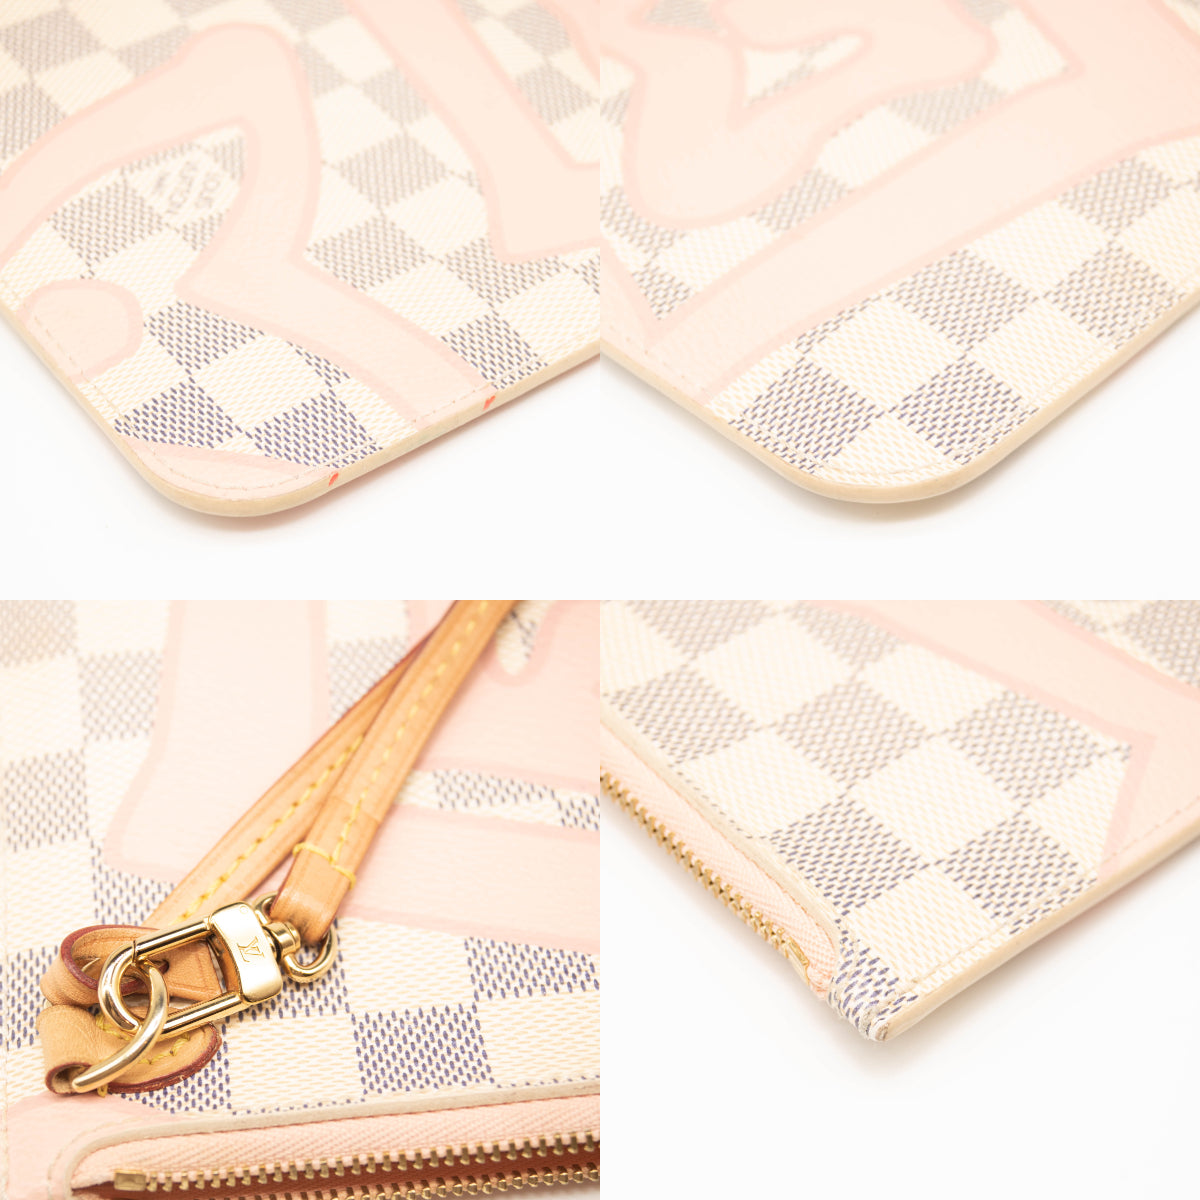 Authentic Louis Vuitton Neverfull Mm Tahitiennes Pink White Damier Azur Bag